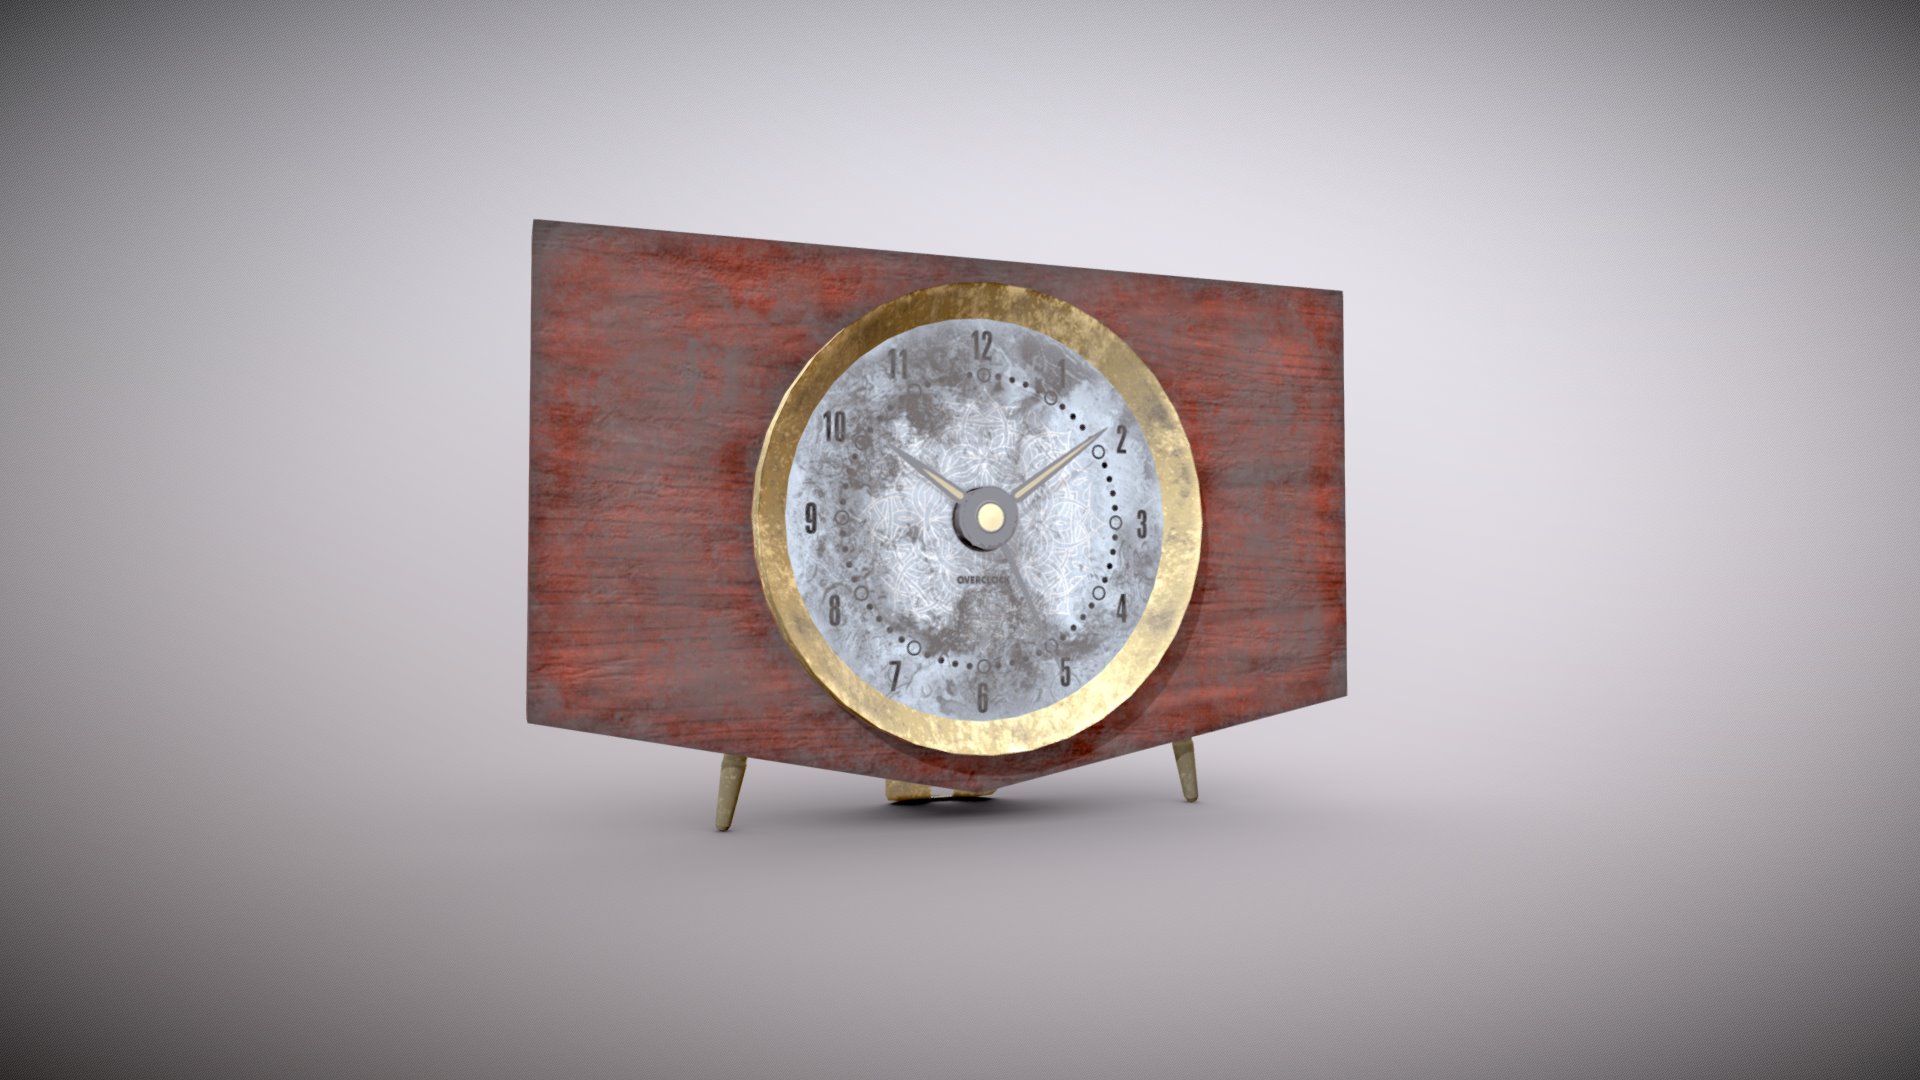 3D model Dirty desktop clock 15 of 20 - This is a 3D model of the Dirty desktop clock 15 of 20. The 3D model is about a wooden clock on a wall.